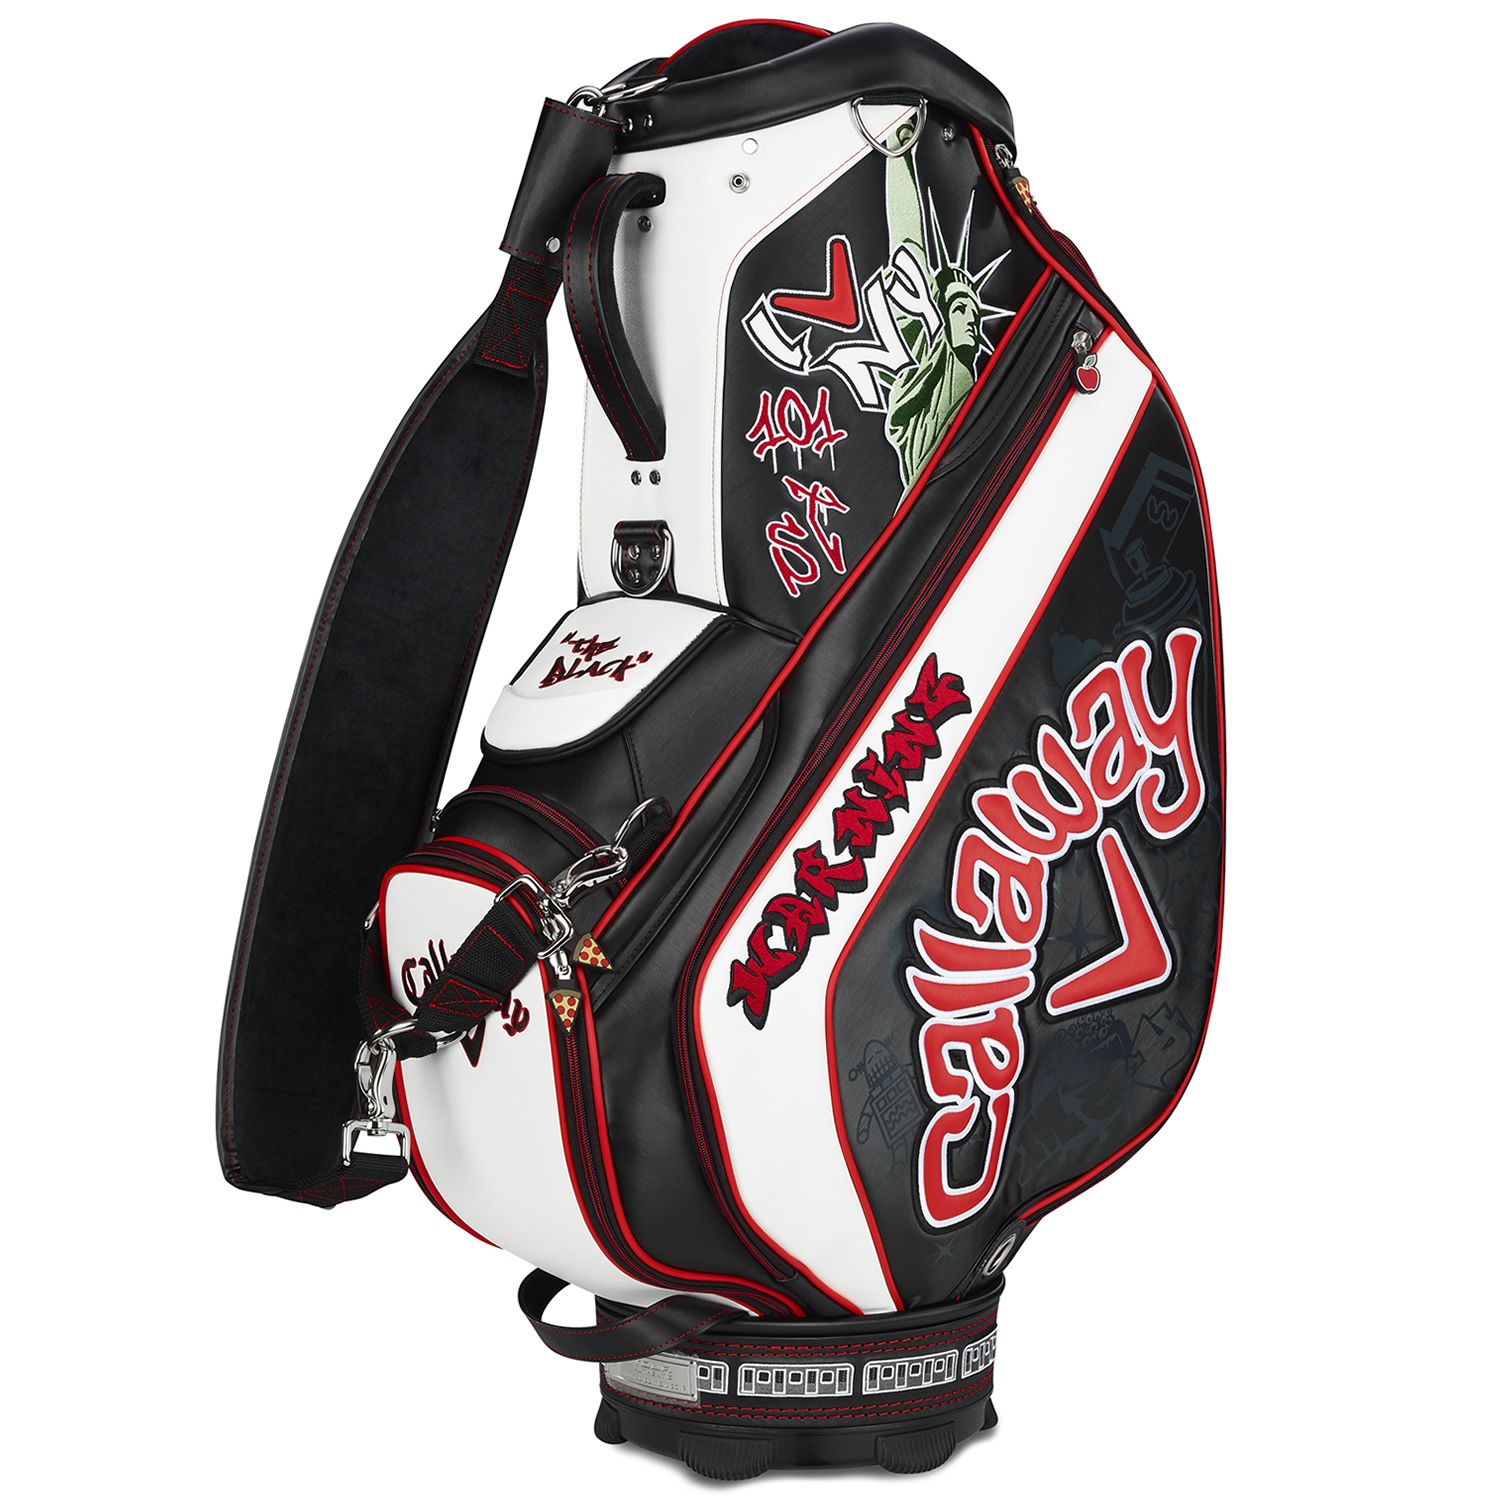 Callaway US PGA Limited Edition Golf Tour Staff Bag Black/White/Red ...